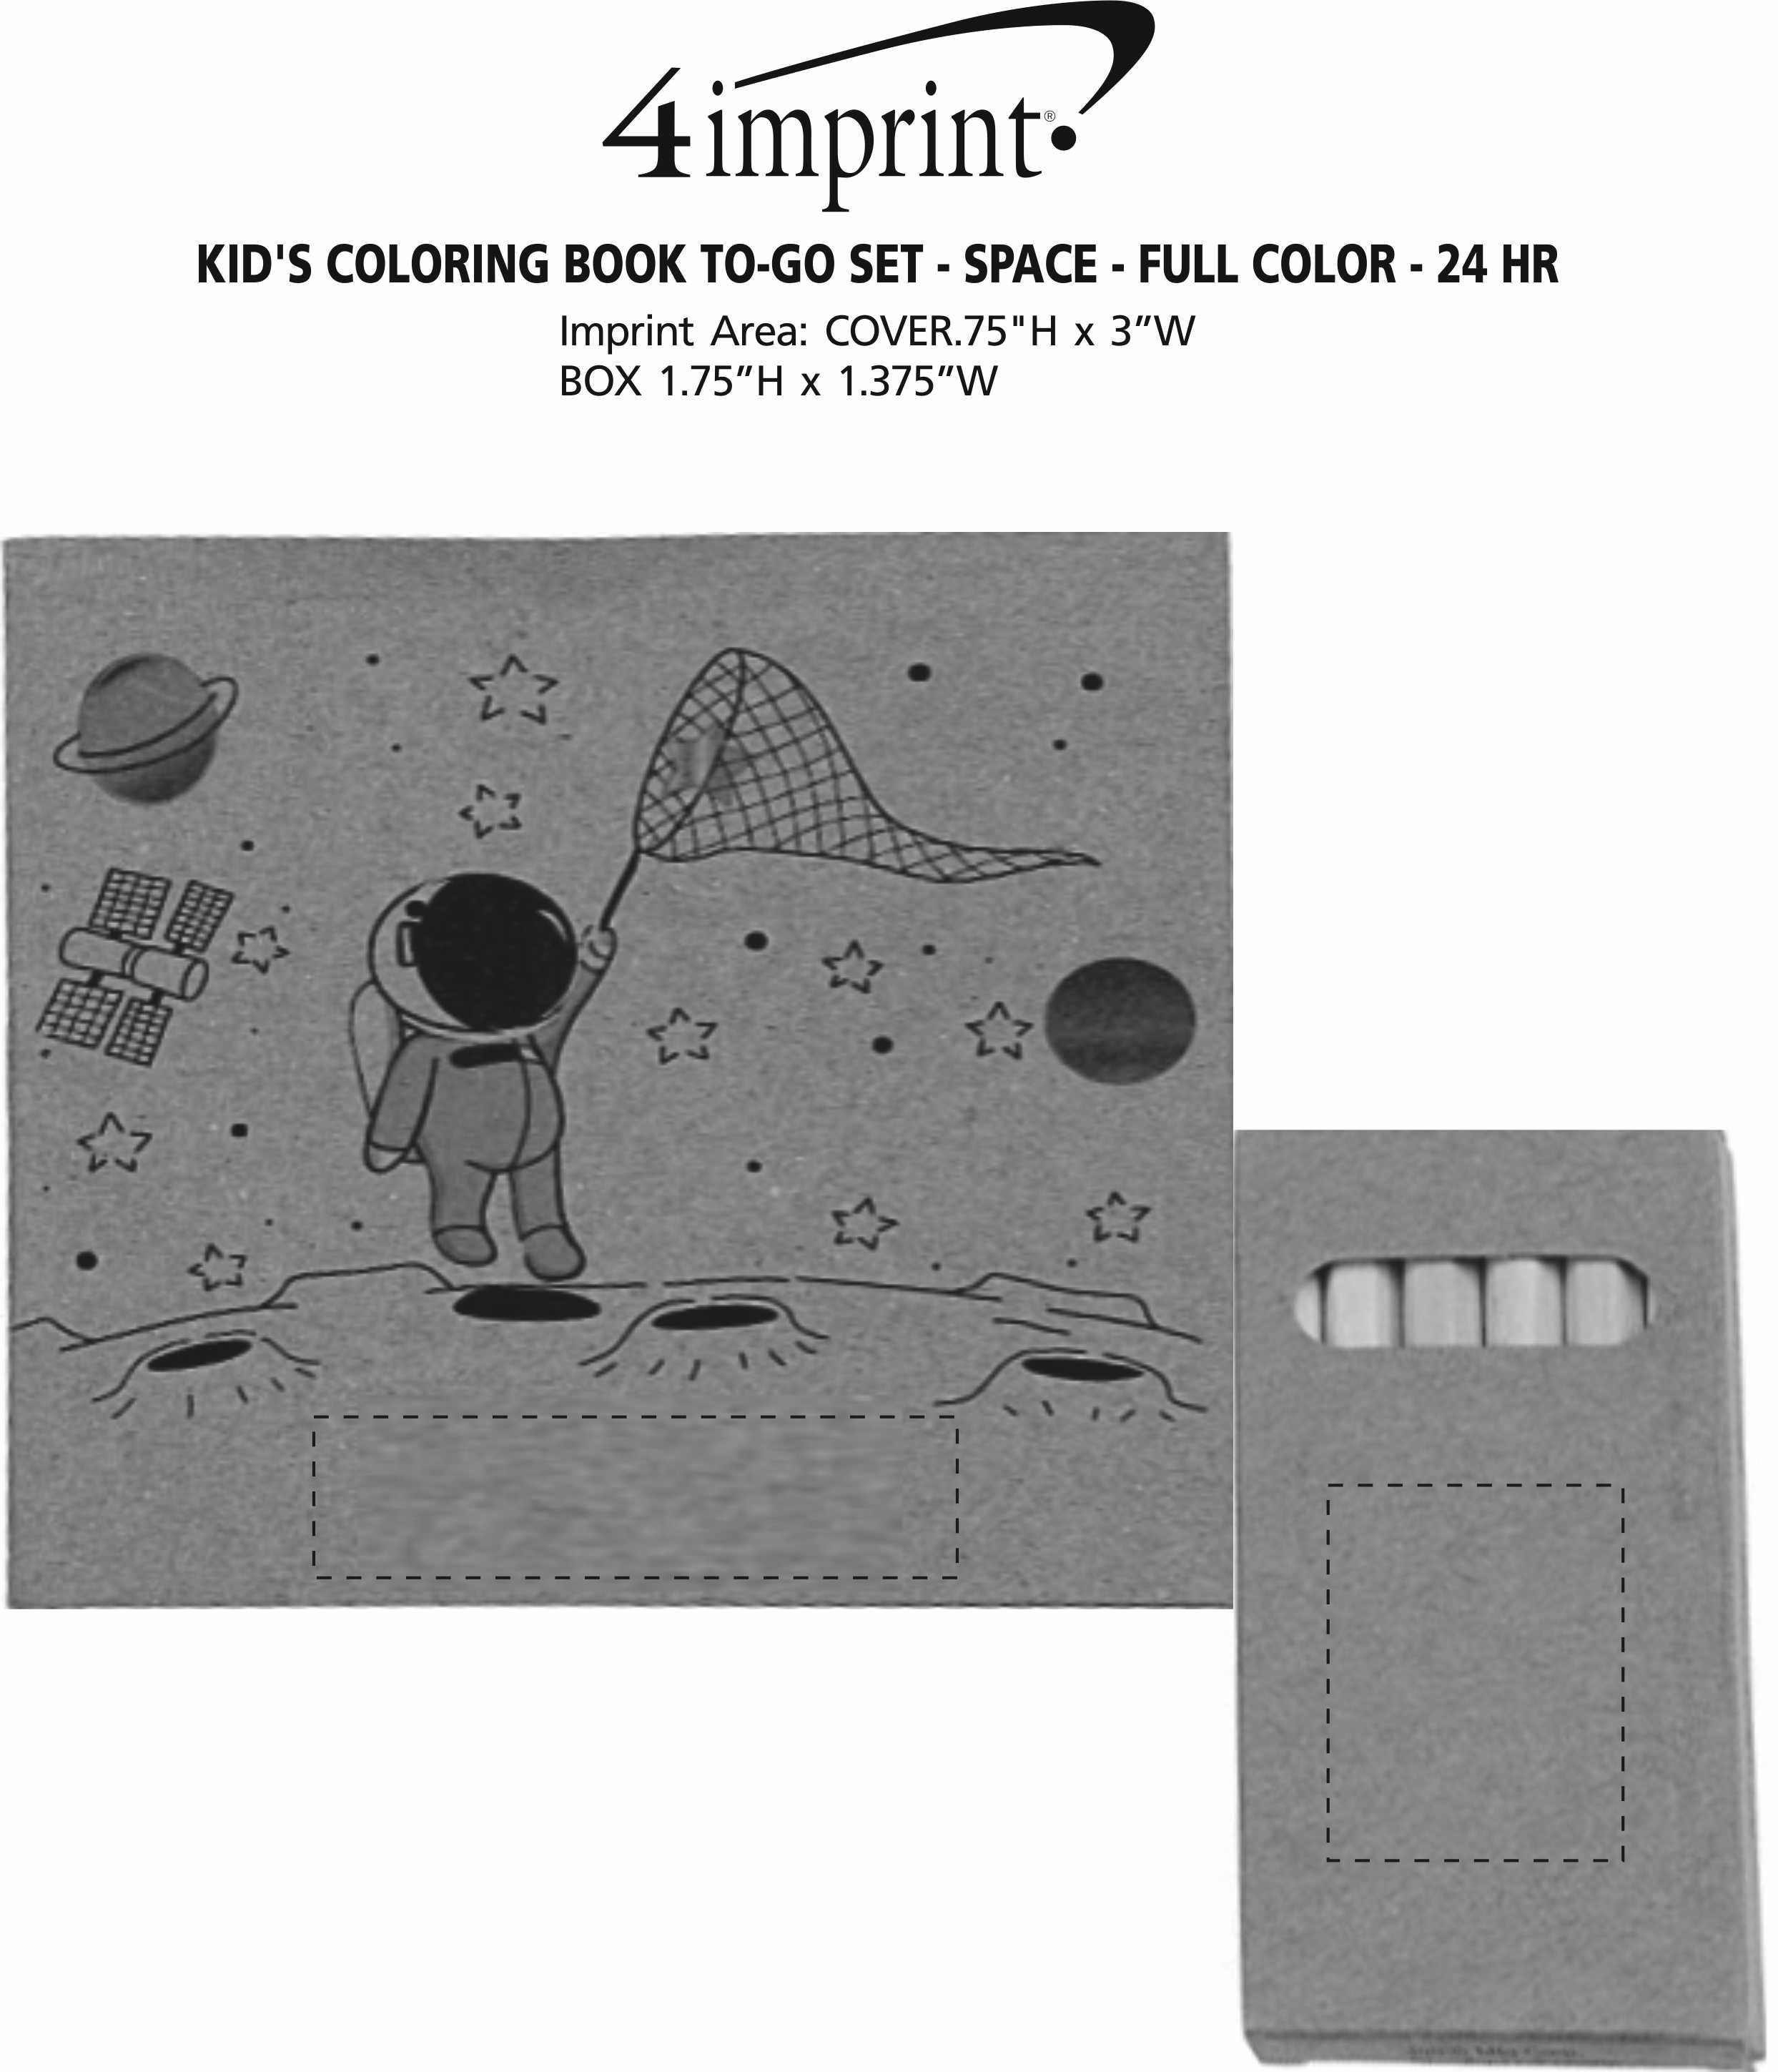 Imprint Area of Kid's Coloring Book To-Go Set - Space - Full Color - 24 hr